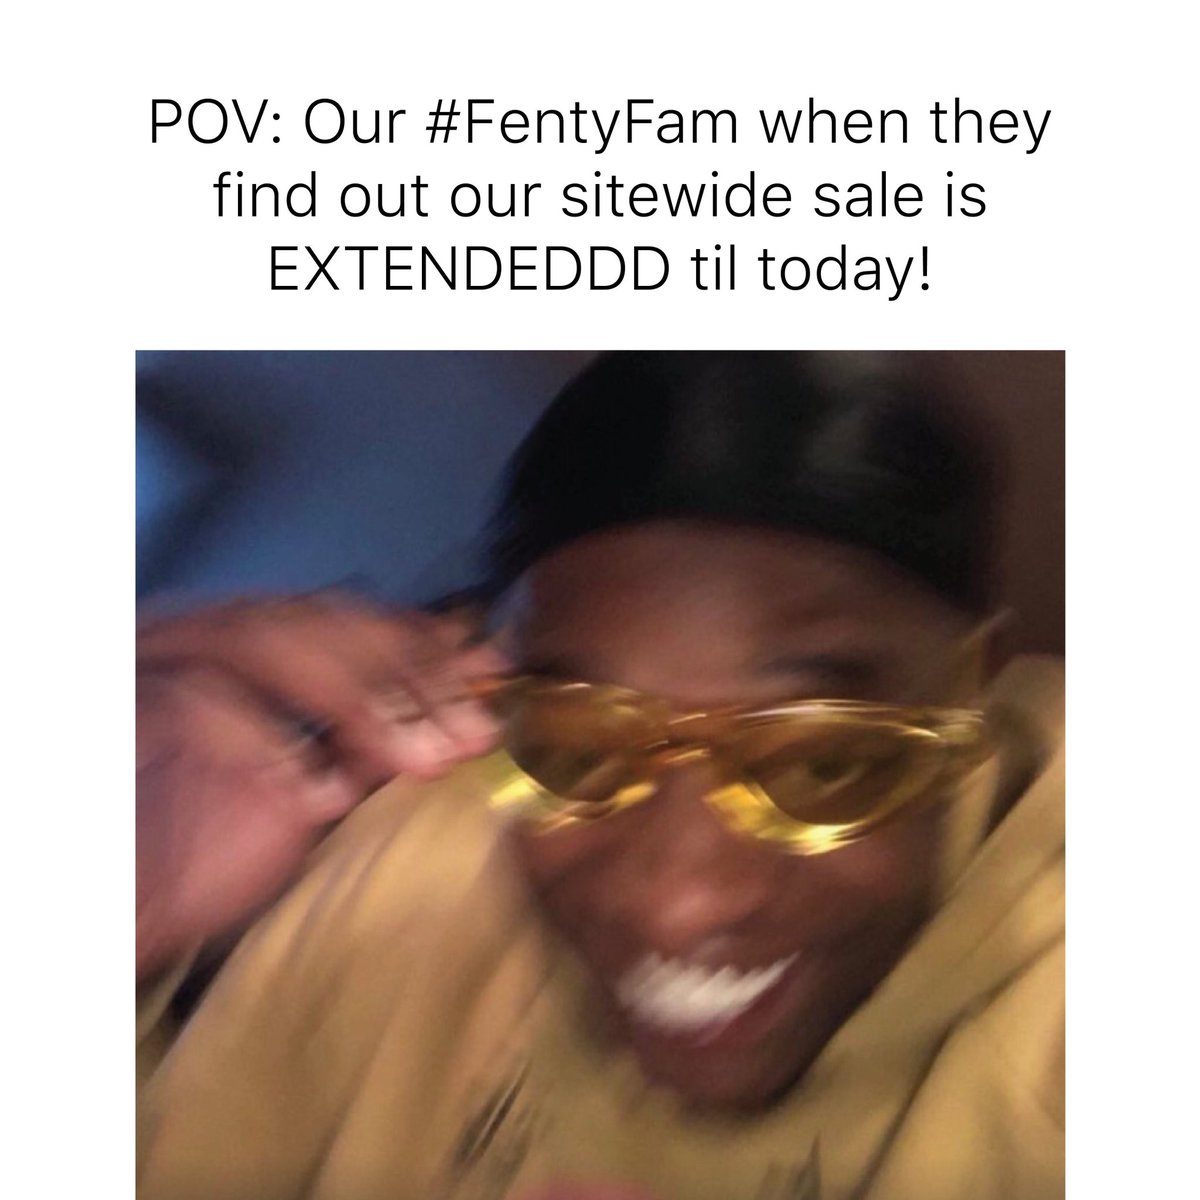 Anotha day, thank you!! 🤑 Just throw 'em in the cart 🛒 We extended our 25% OFF SITEWIDE + deeper dealz 1-DAY for our #FentyFam ofc! Betta hurry, your re-up is callin' 📞​➡️ bit.ly/FentyFamTurnUp